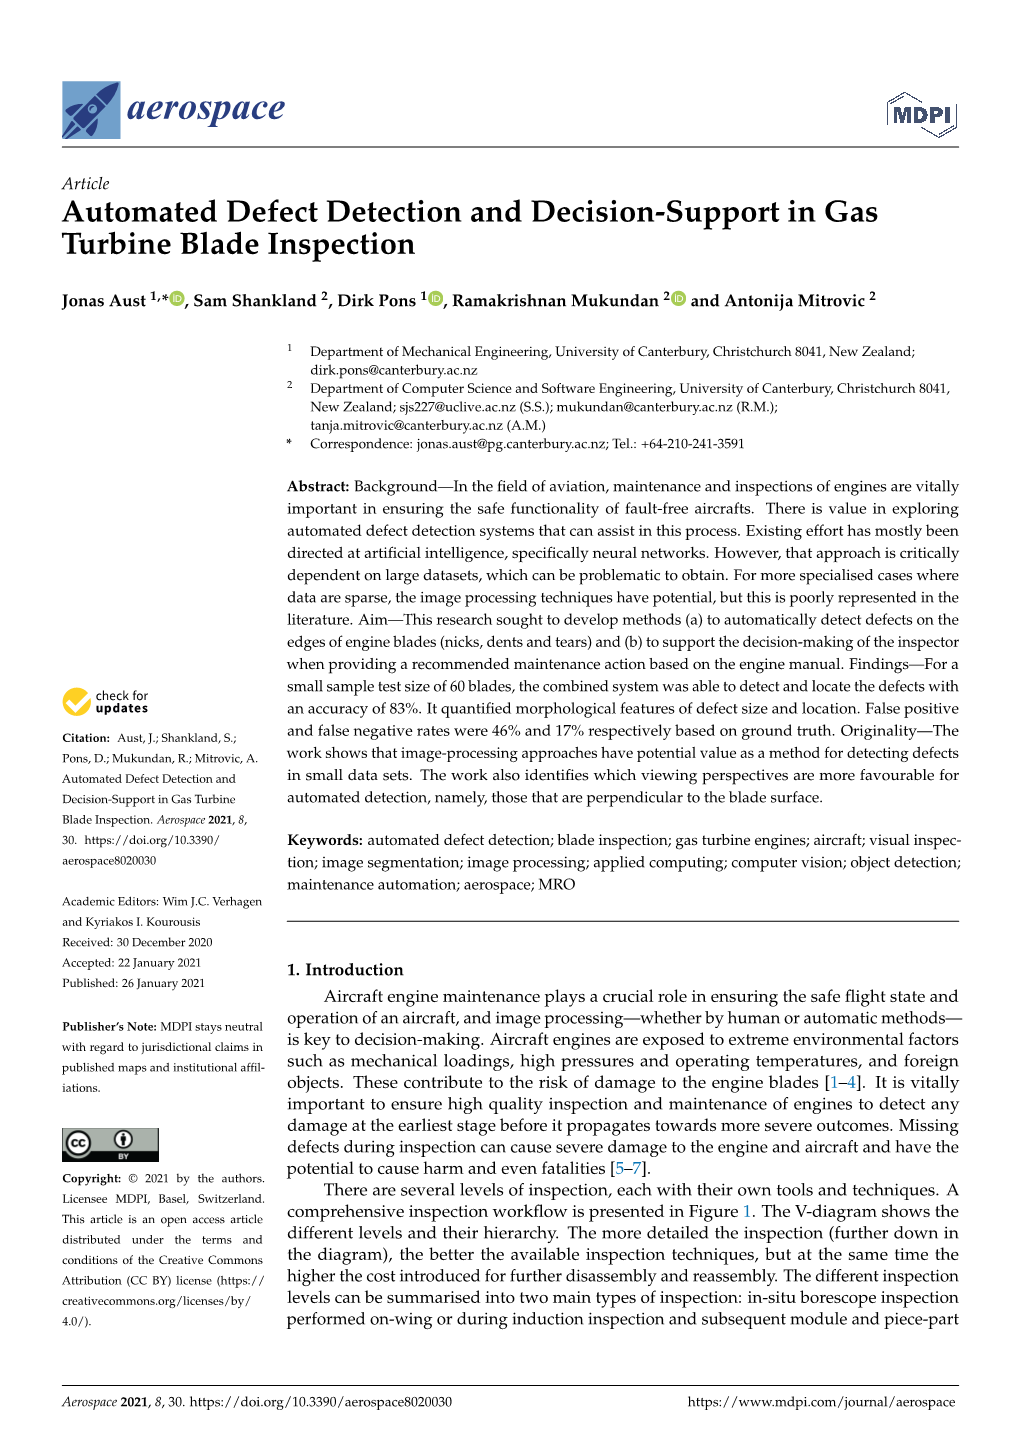 Automated Defect Detection and Decision-Support in Gas Turbine Blade Inspection